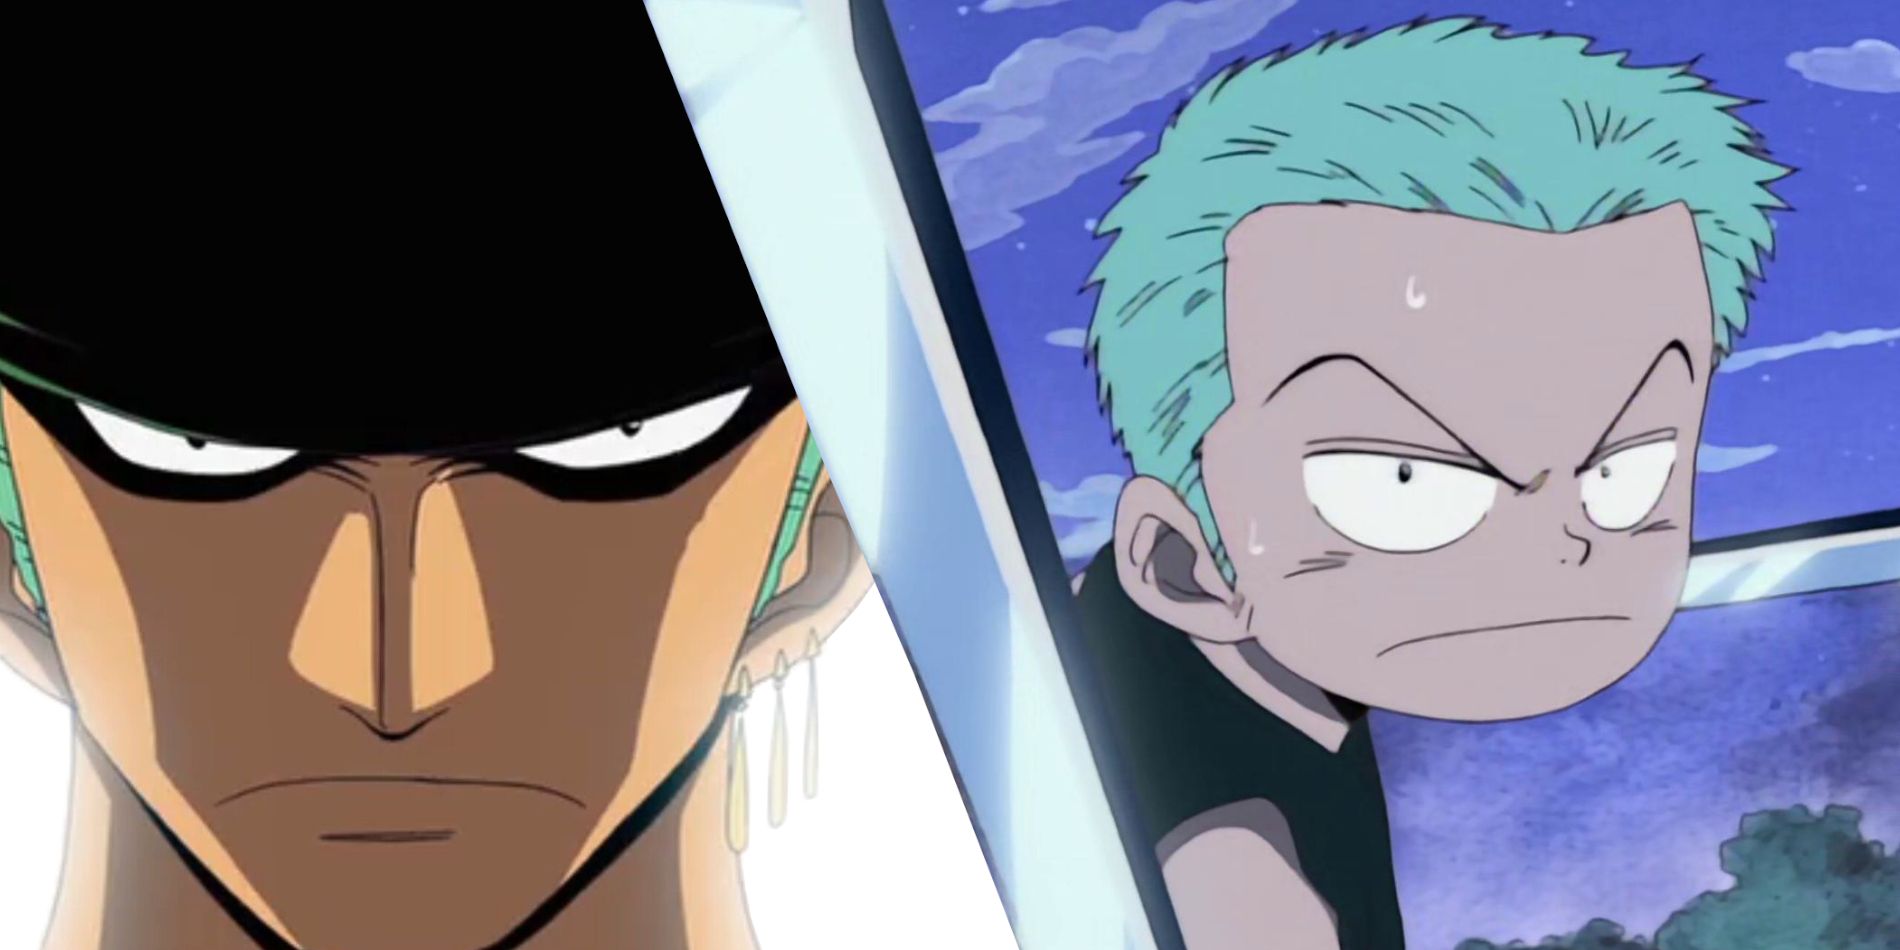 An image shows two version of Zoro from One Piece. One side shows a younger Zoro holding two swords, the other side show a more grown up version of Zoro, with two eyes and his trademark bandana.